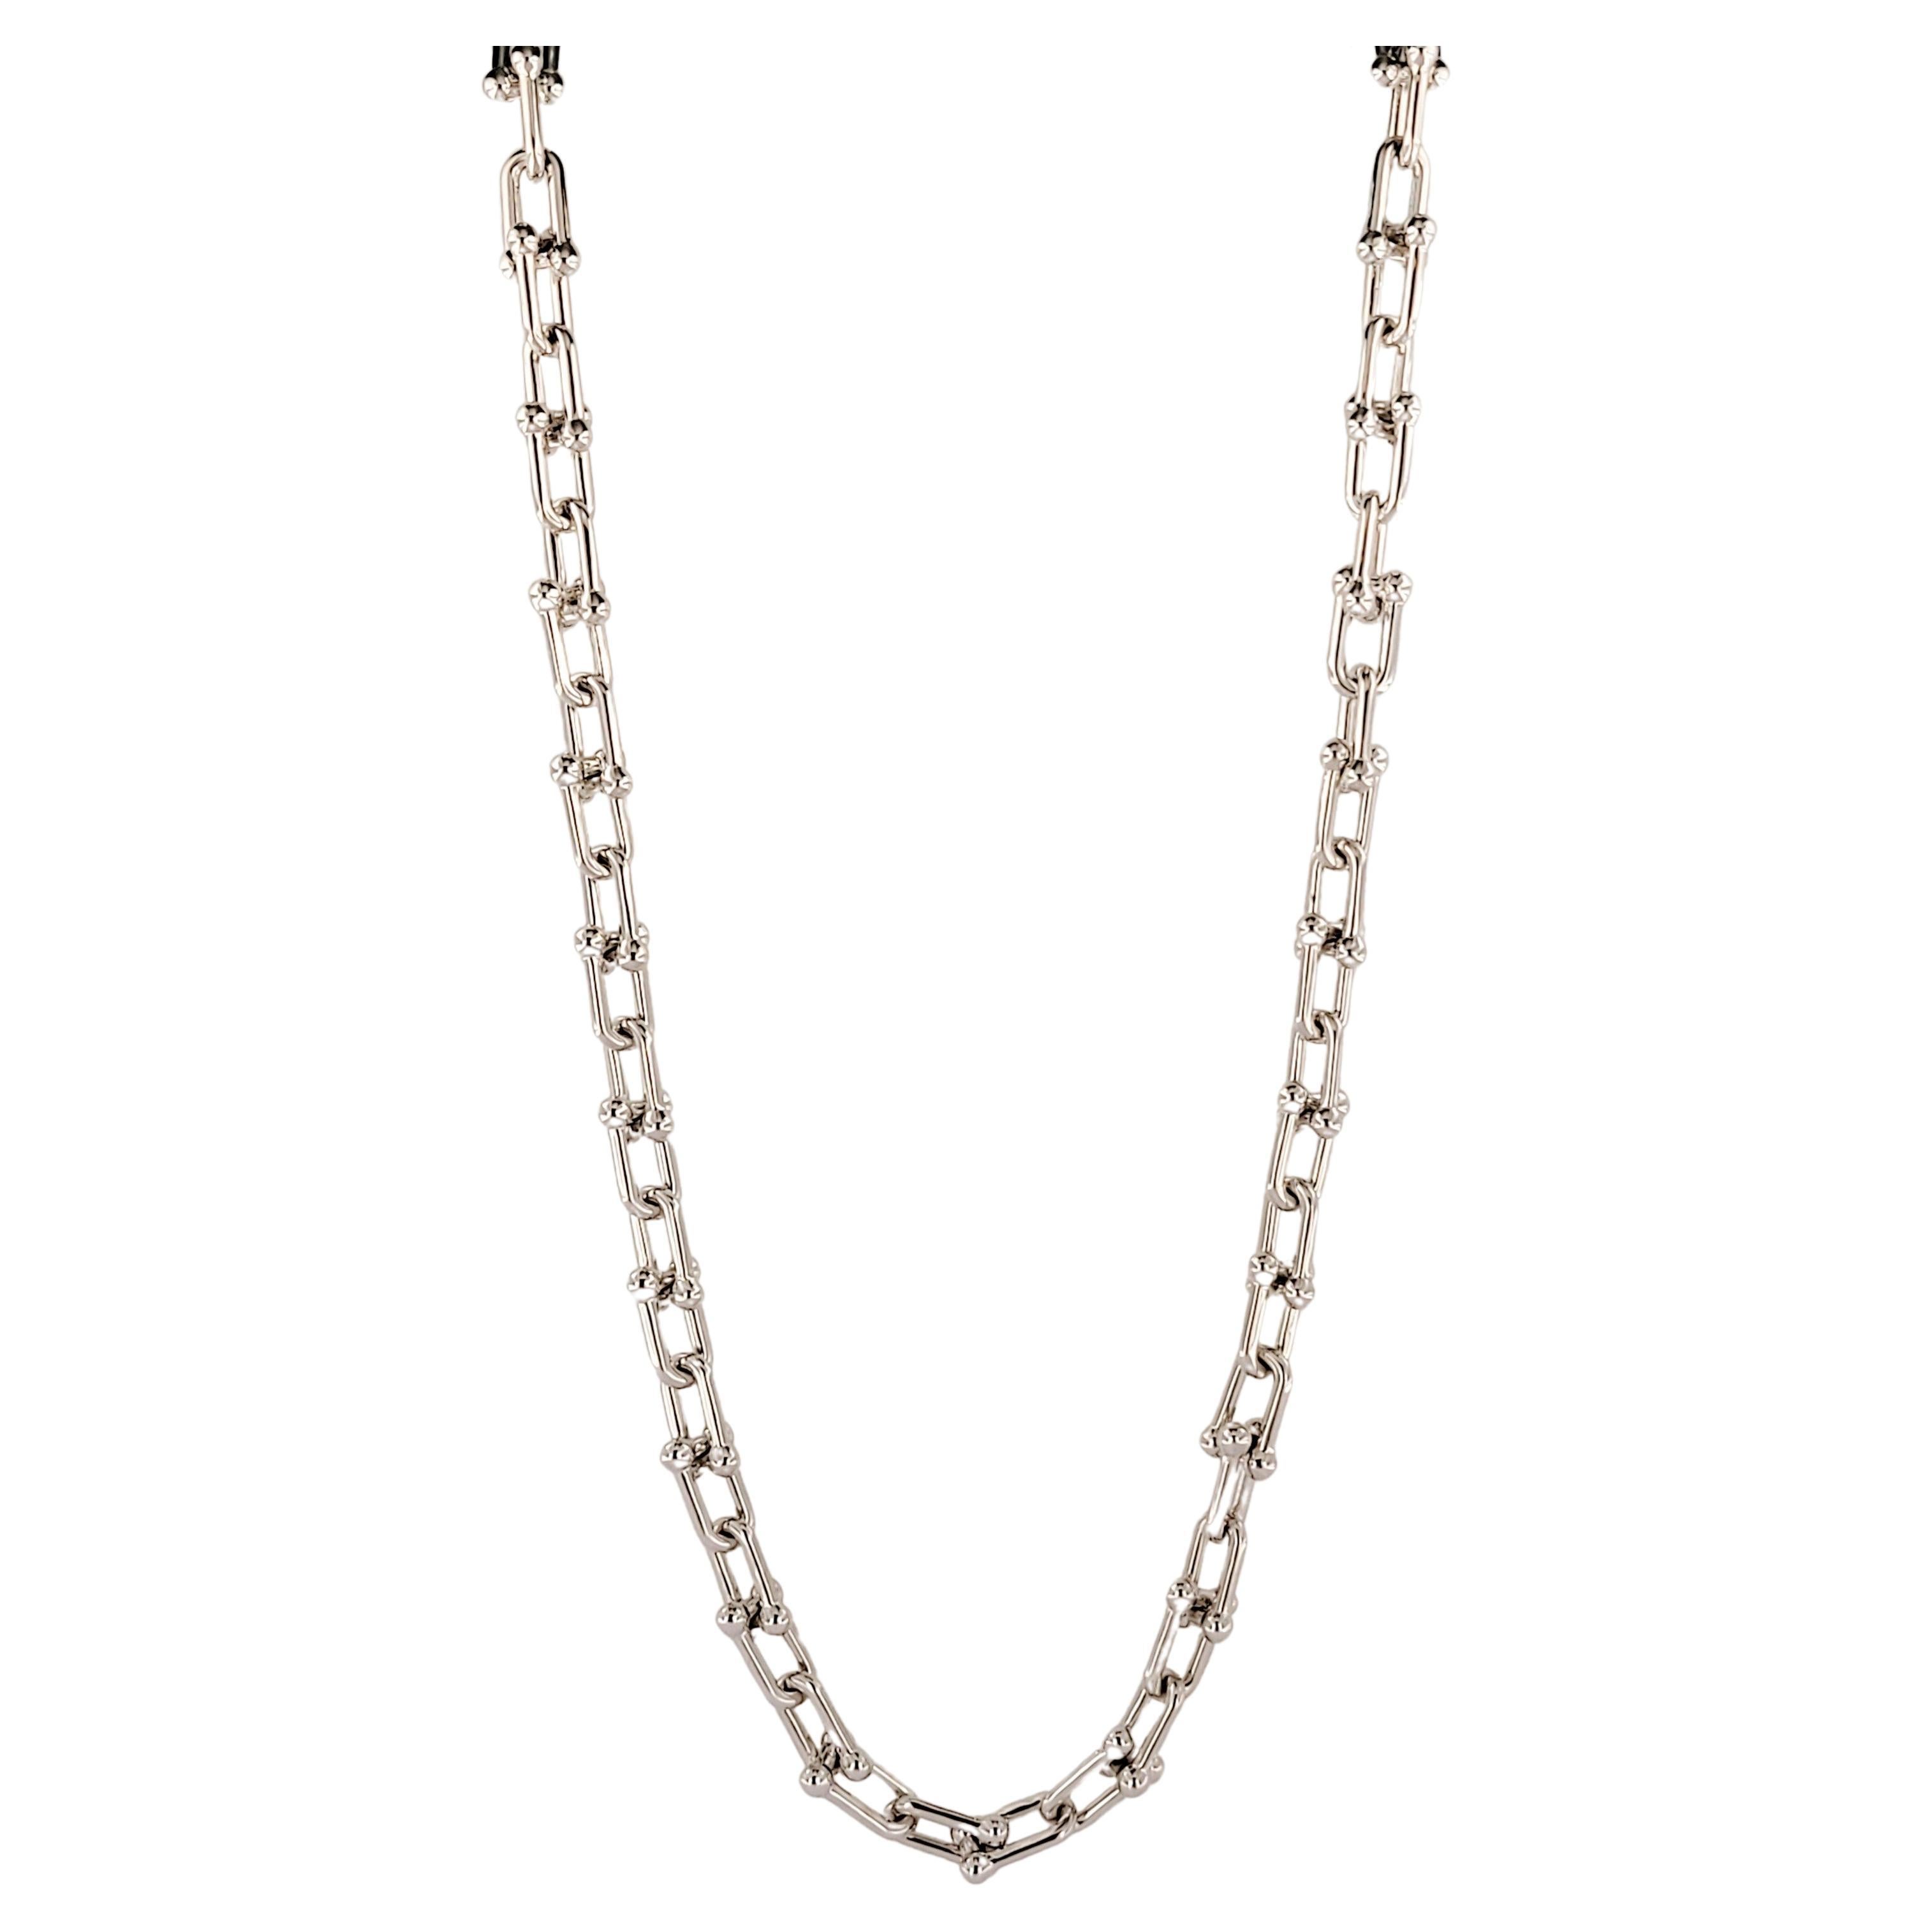 Tiffany Hard Wear Small Link Necklace in Sterling Silver